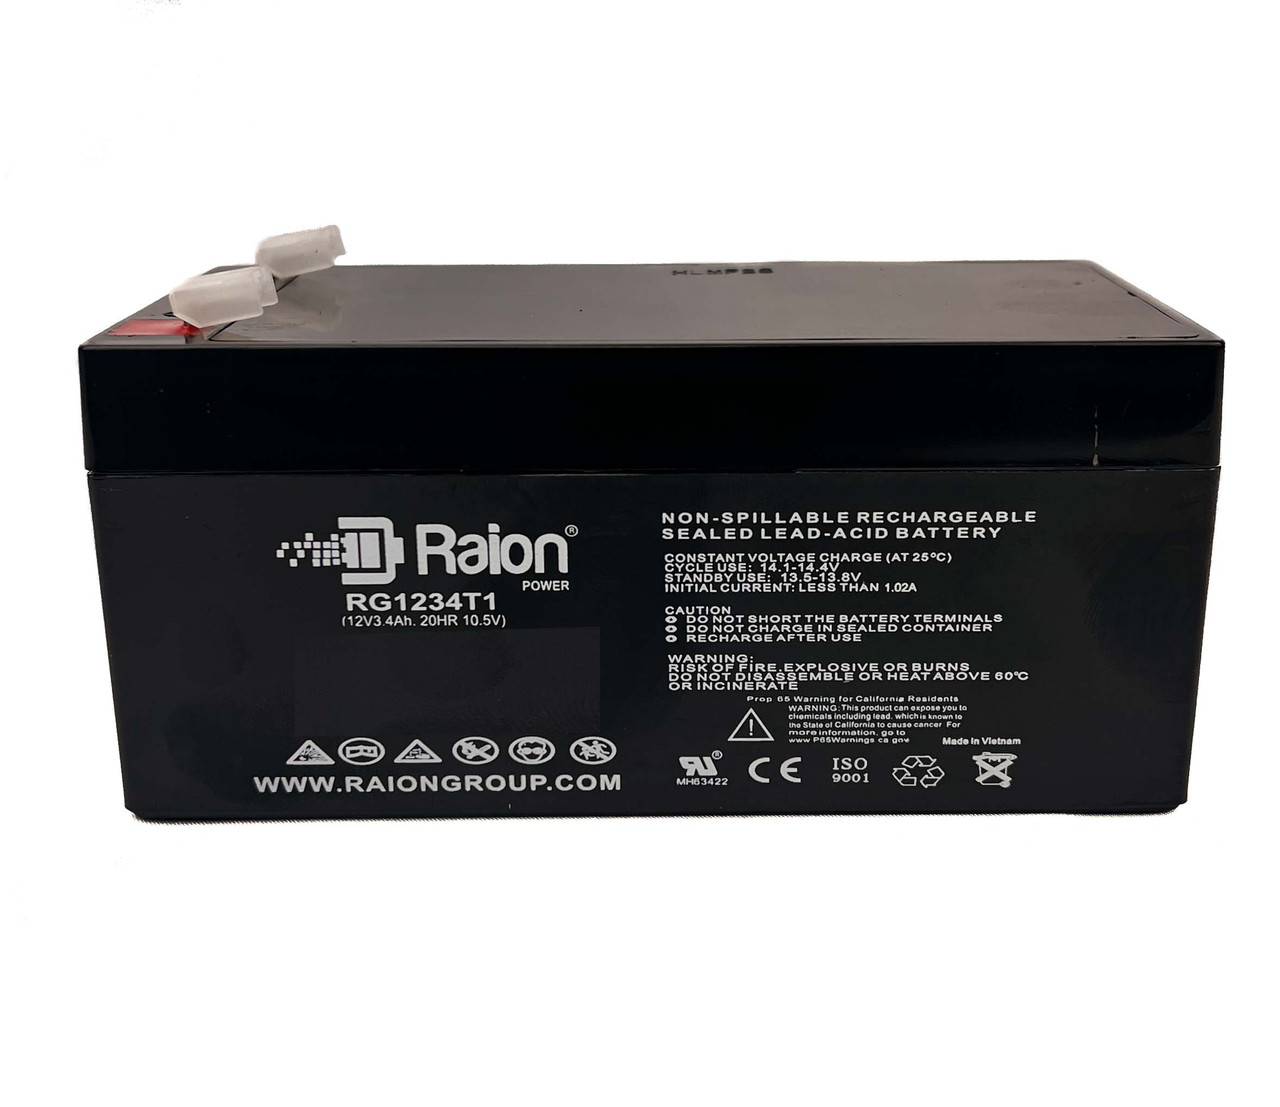 Raion Power RG1234T1 Rechargeable Compatible Replacement Battery for Gruber Power 58AGEN-12-3-F1